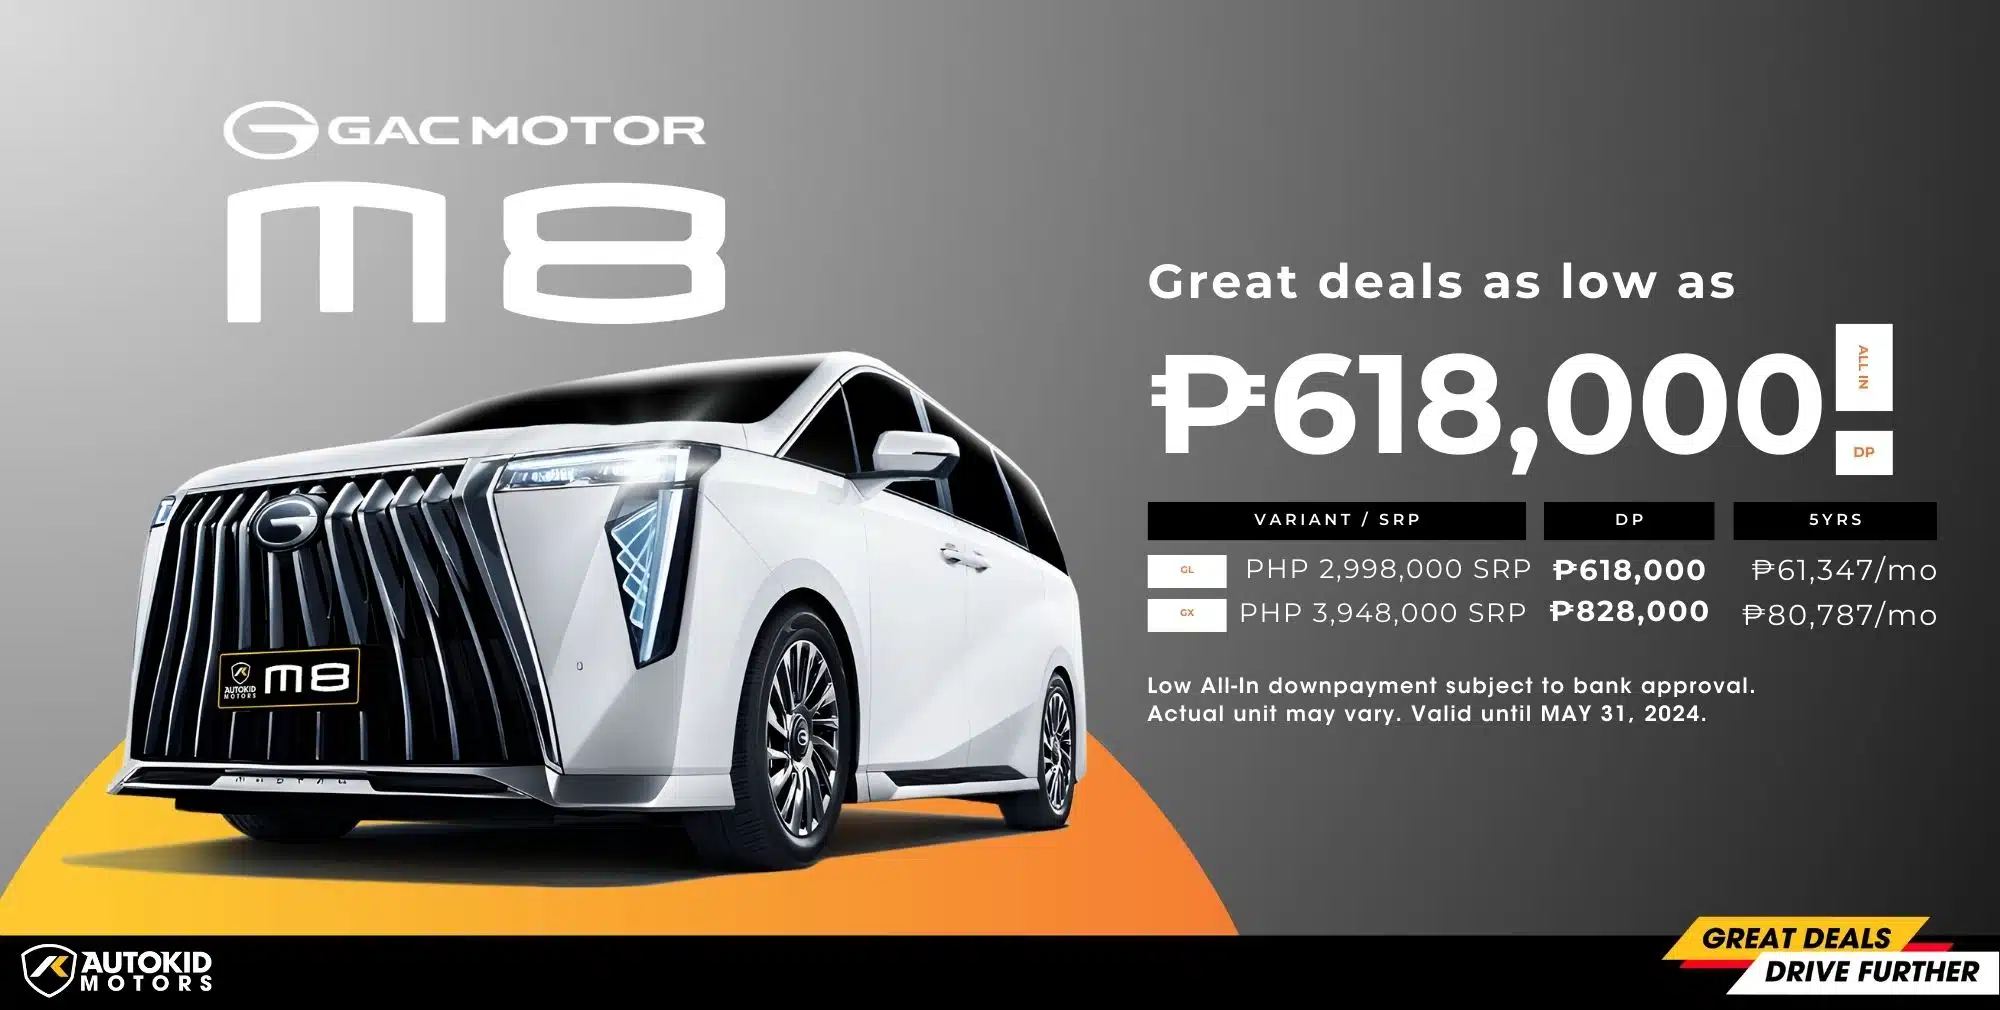 GAC M8 lowest down payment on car Philippines